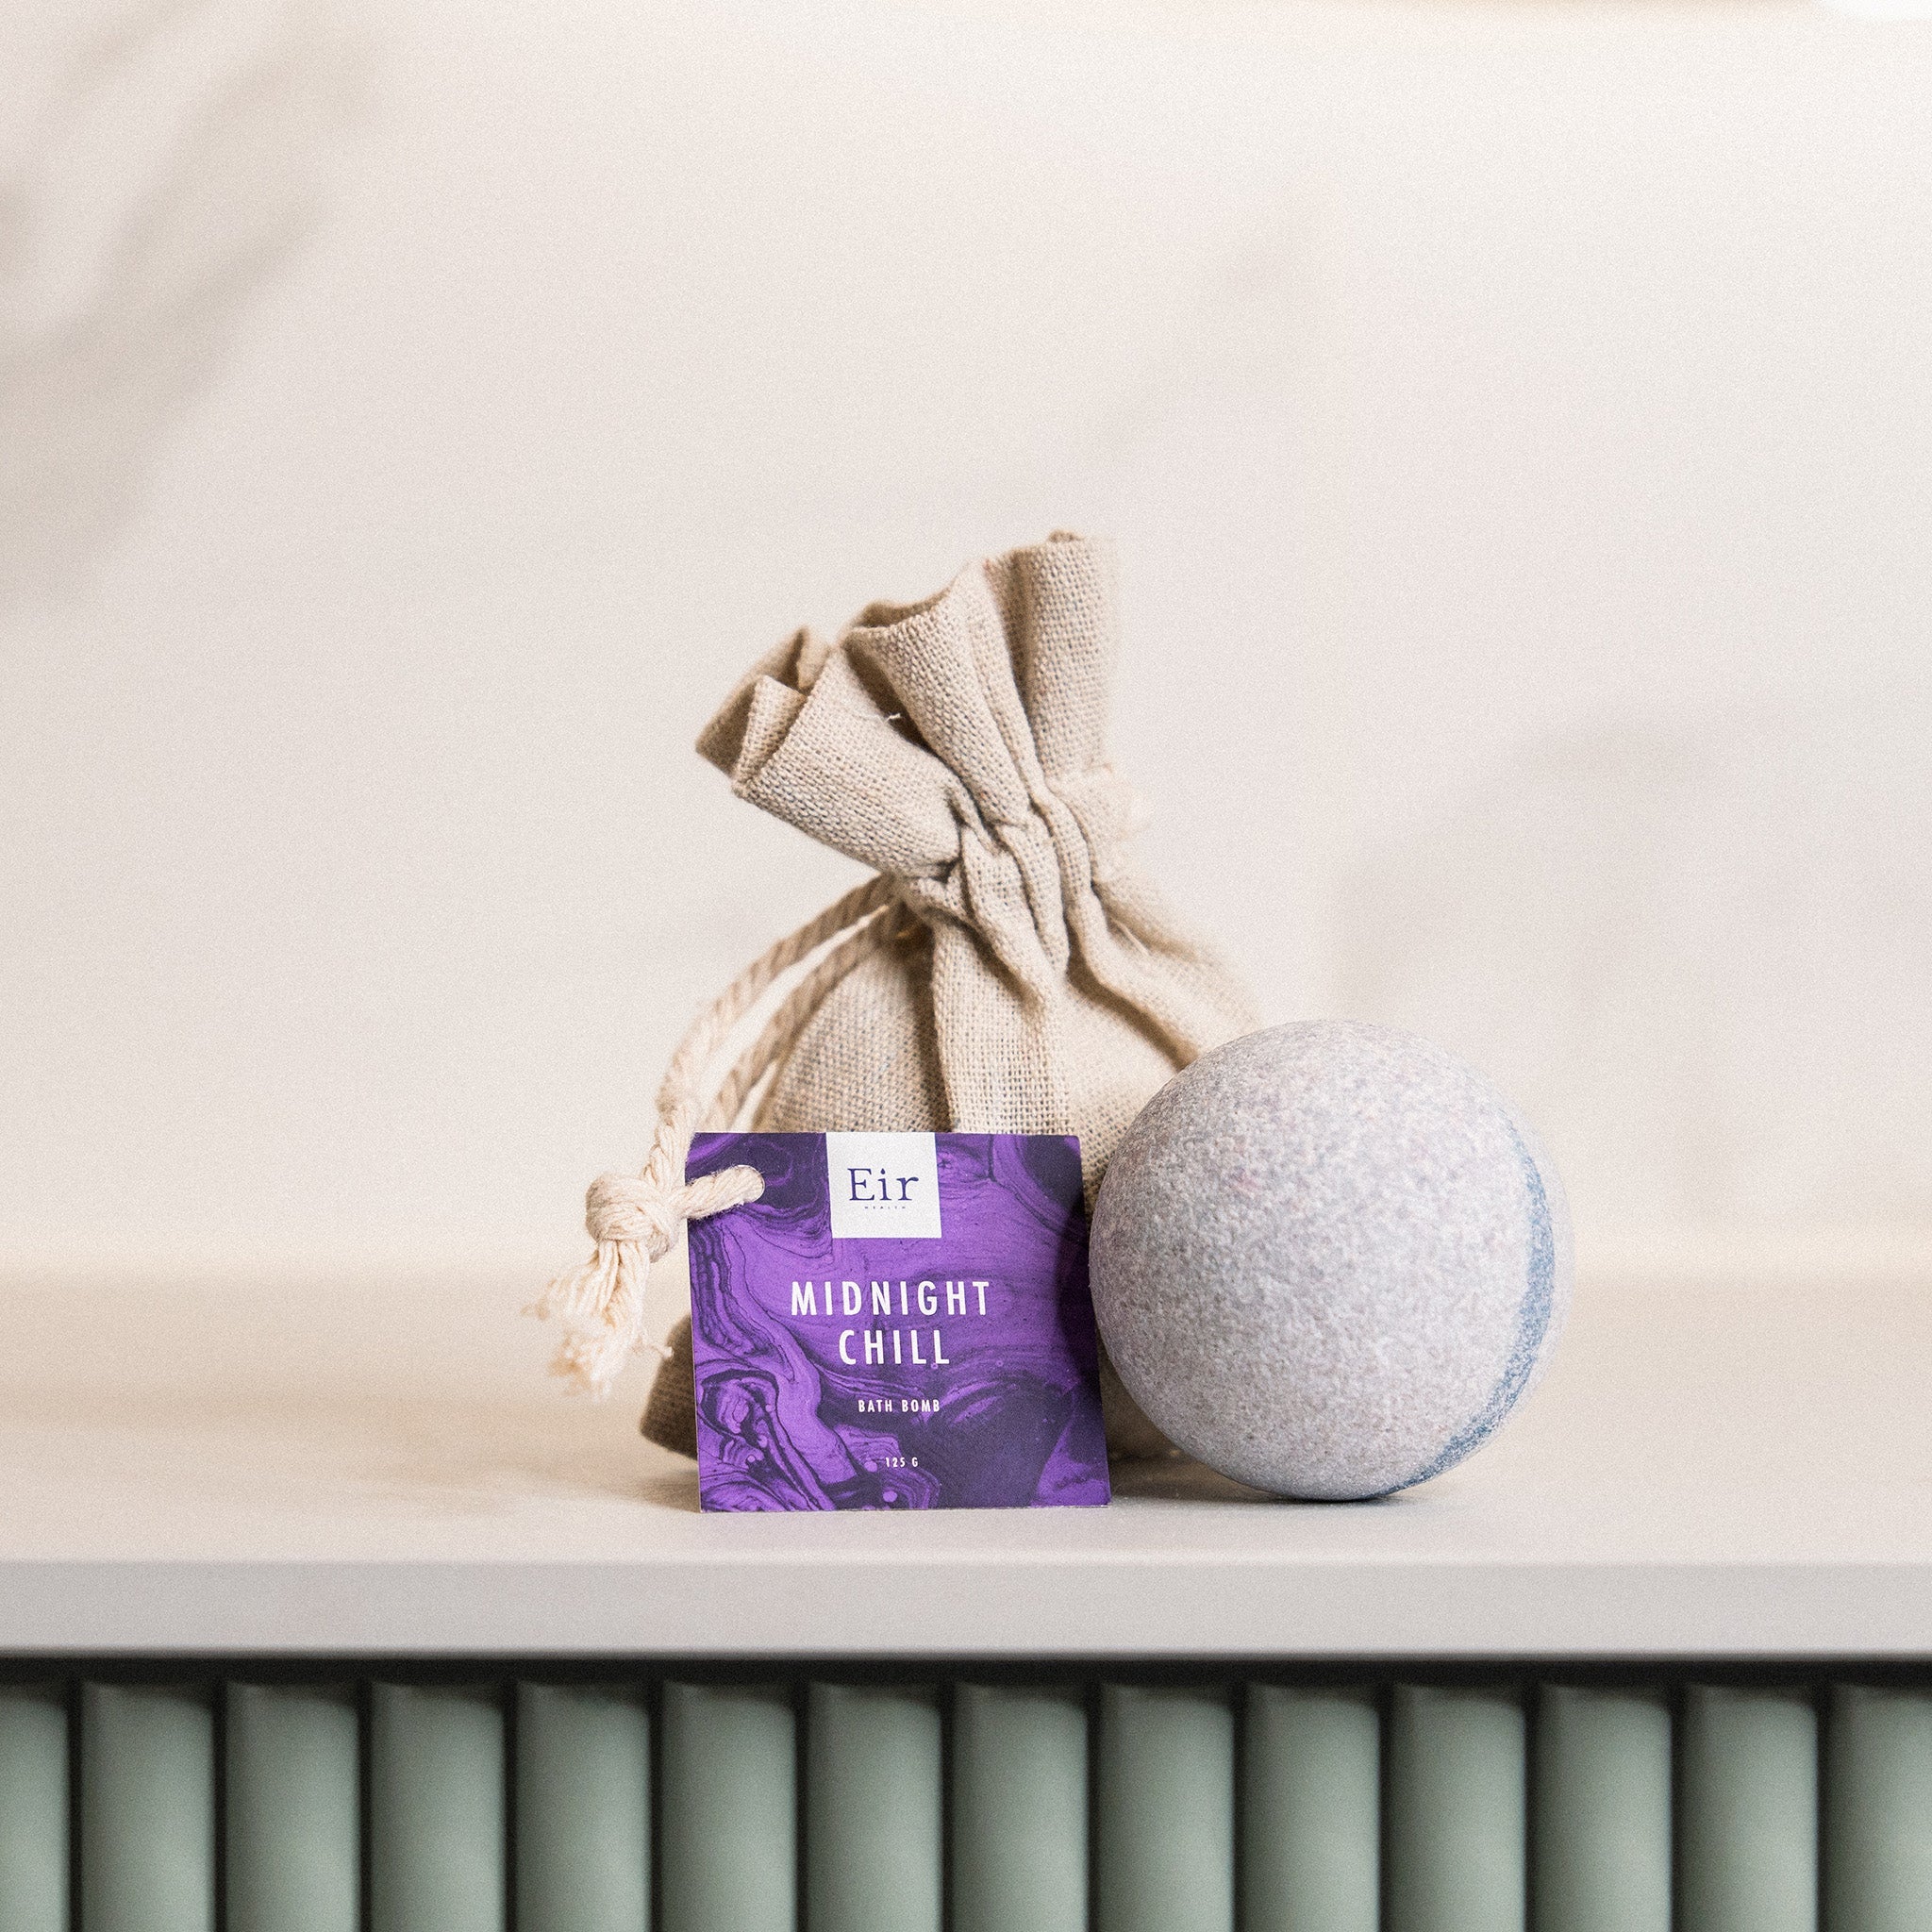  Packaging of Eir's 'Midnight Chill' bath bomb, a jute pouch, and a grey bath bomb on a radiator in a bright interior.